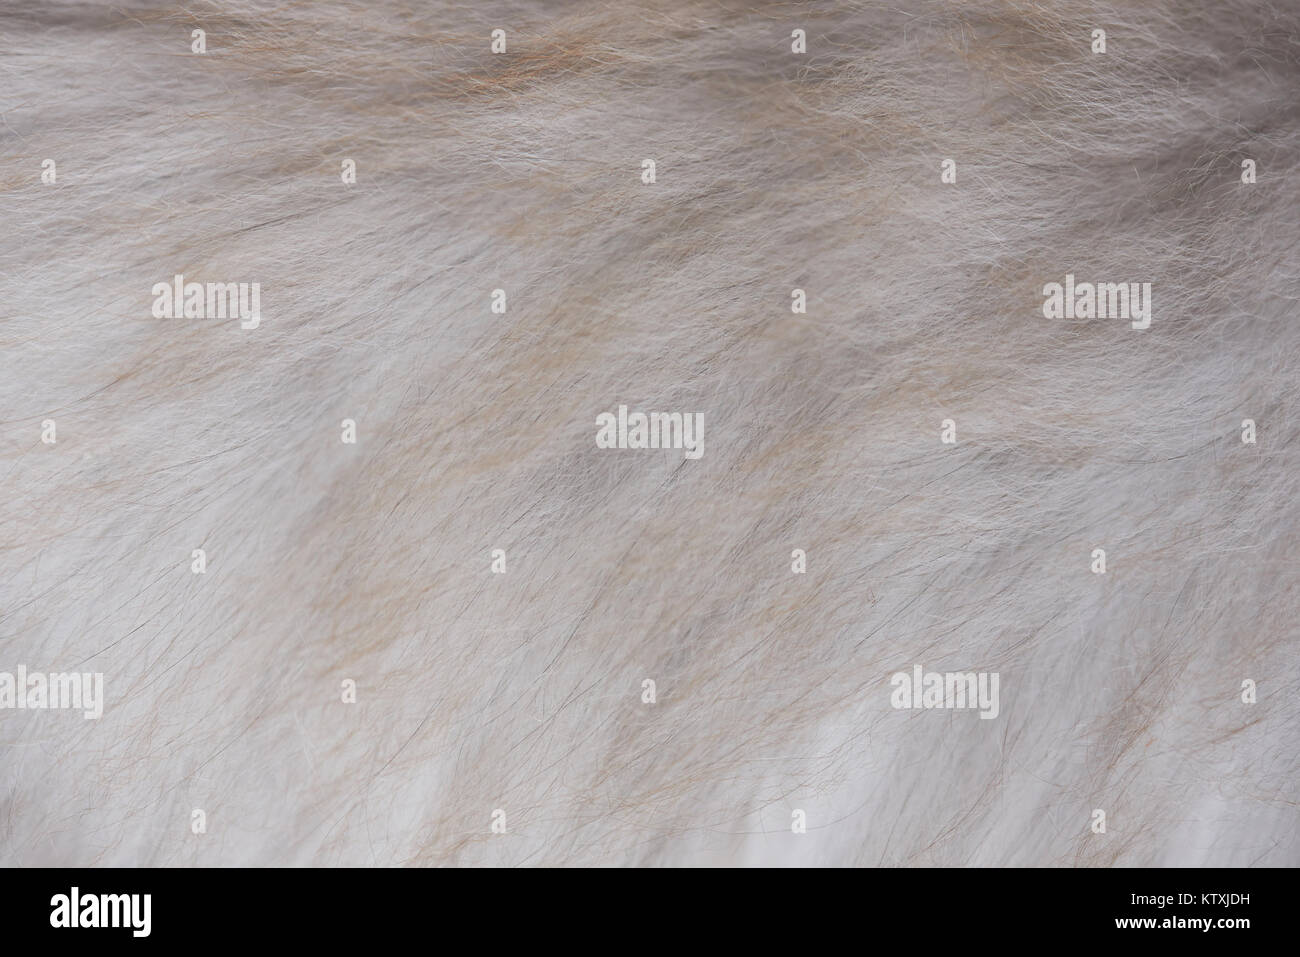 Gray brown fur texture of fluufy cat. Close-up of gray animal fur background Stock Photo